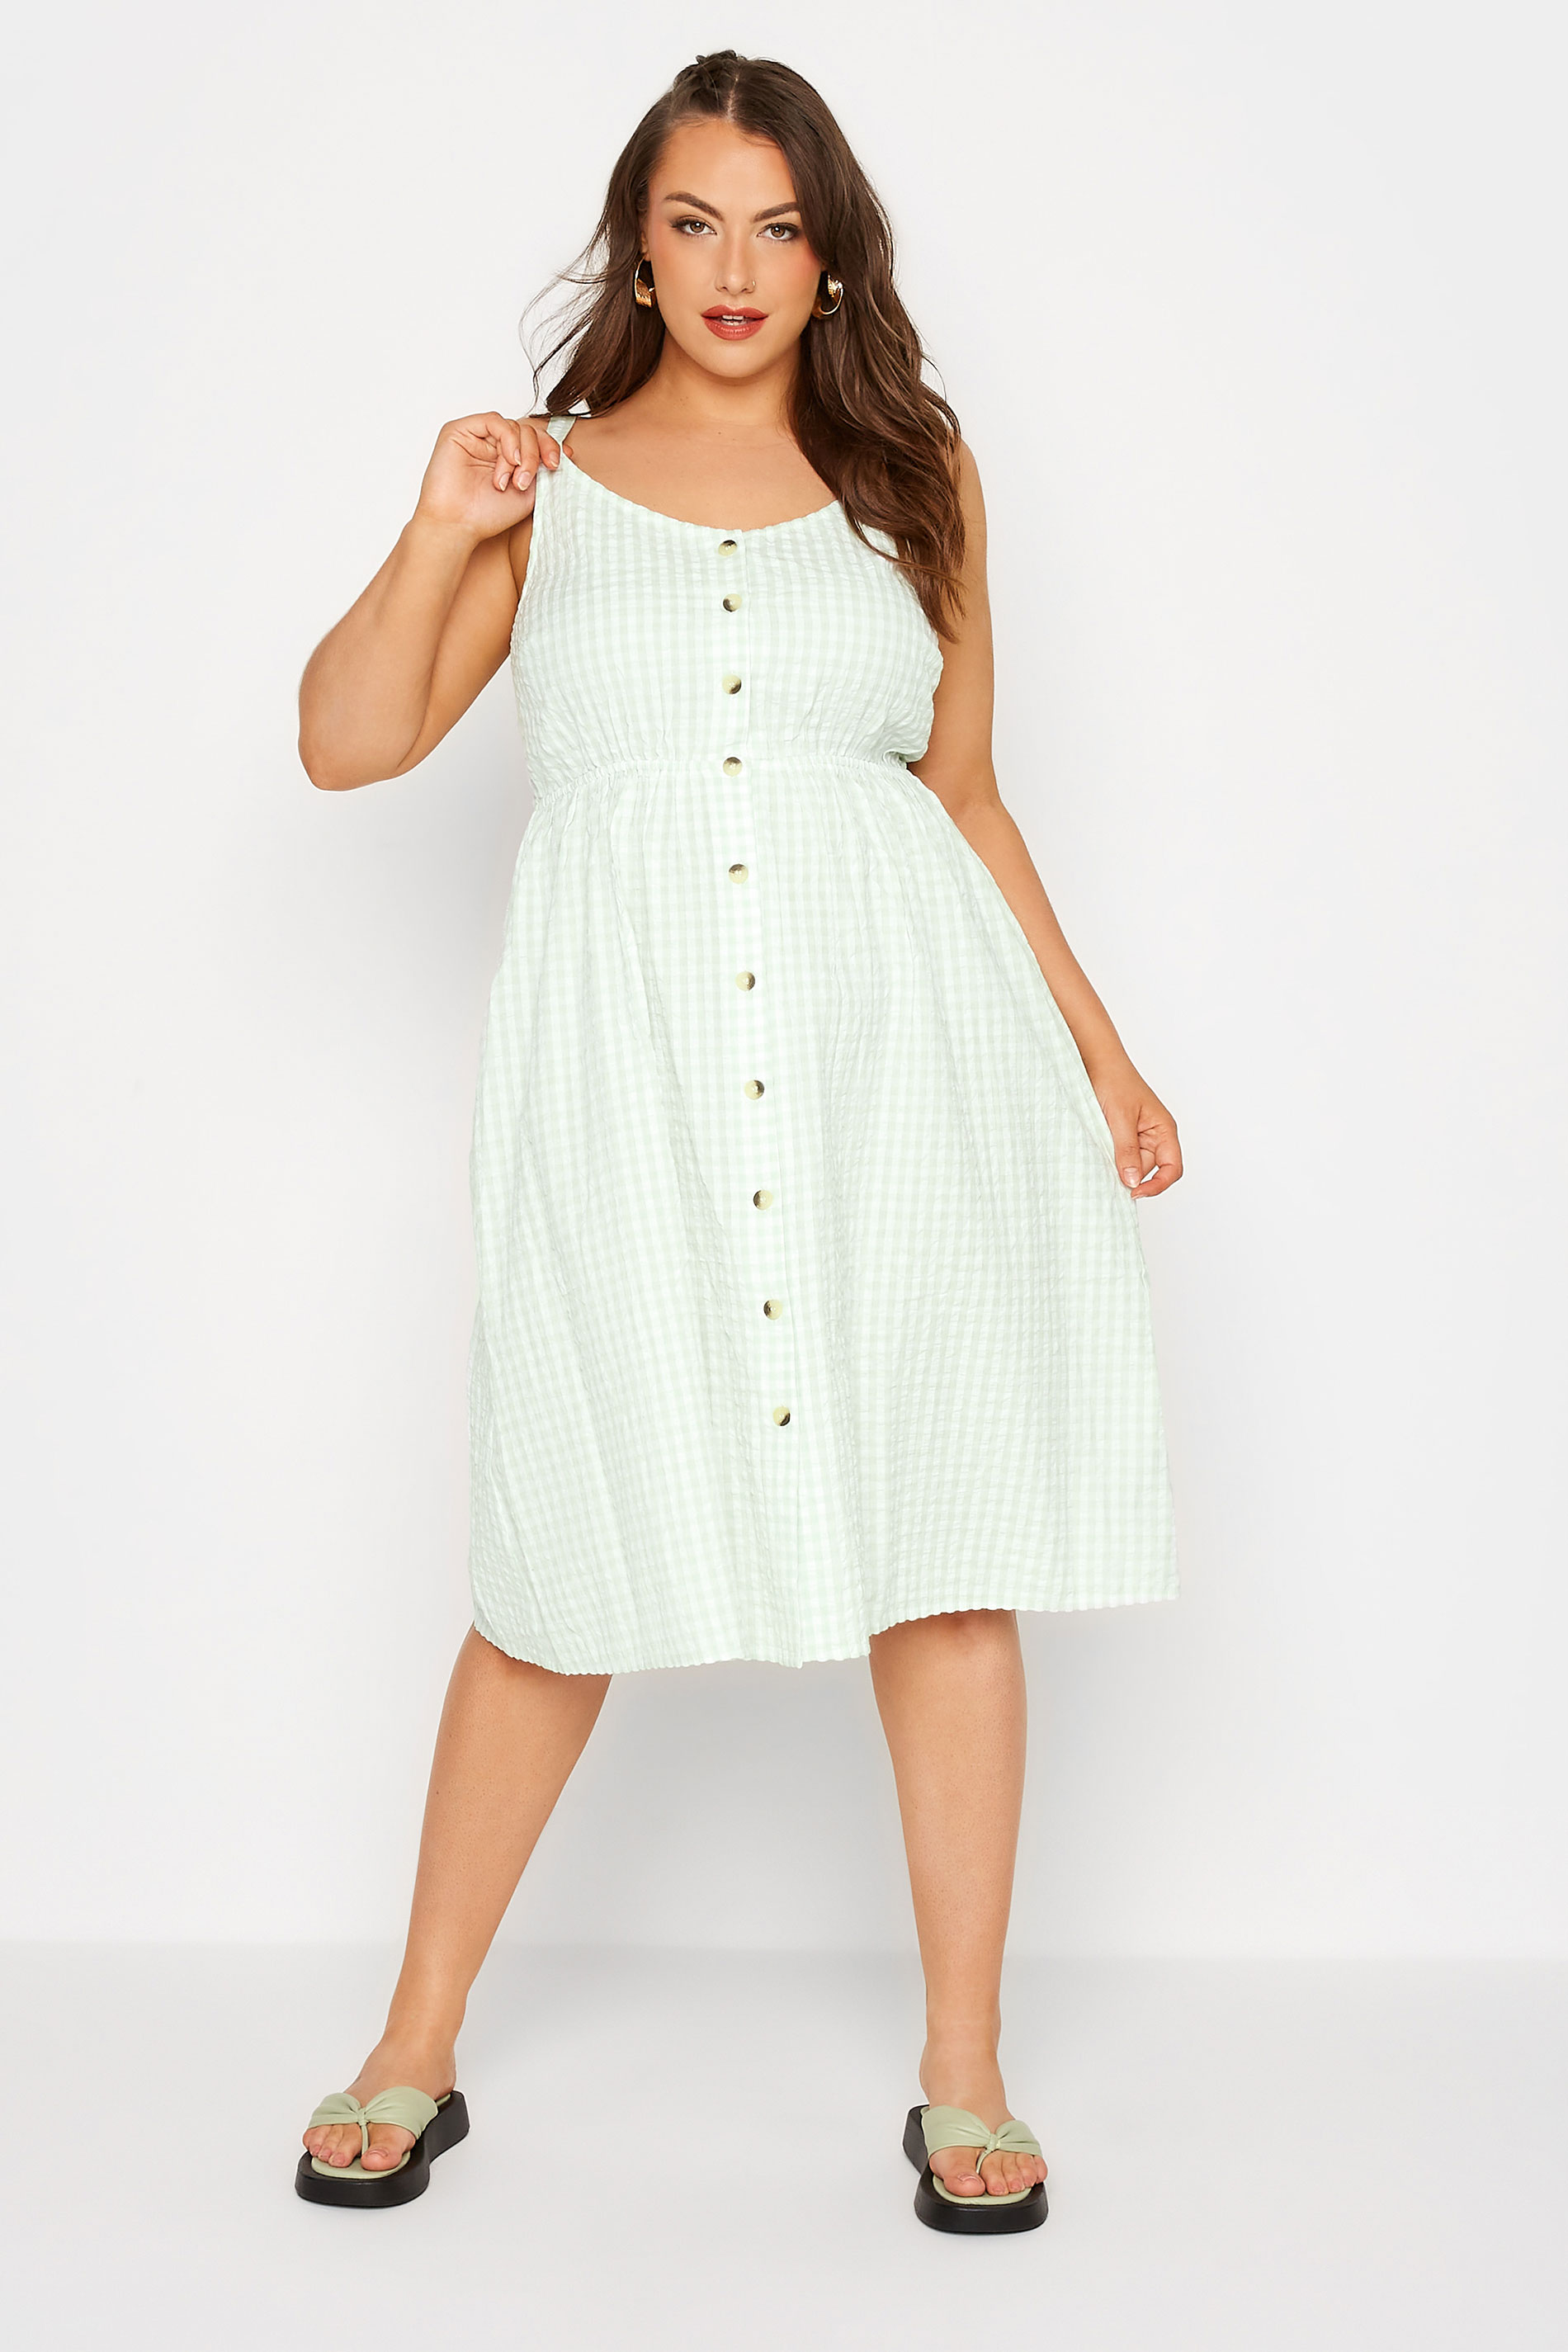 LIMITED COLLECTION Curve Green Gingham Button Front Sundress_A.jpg